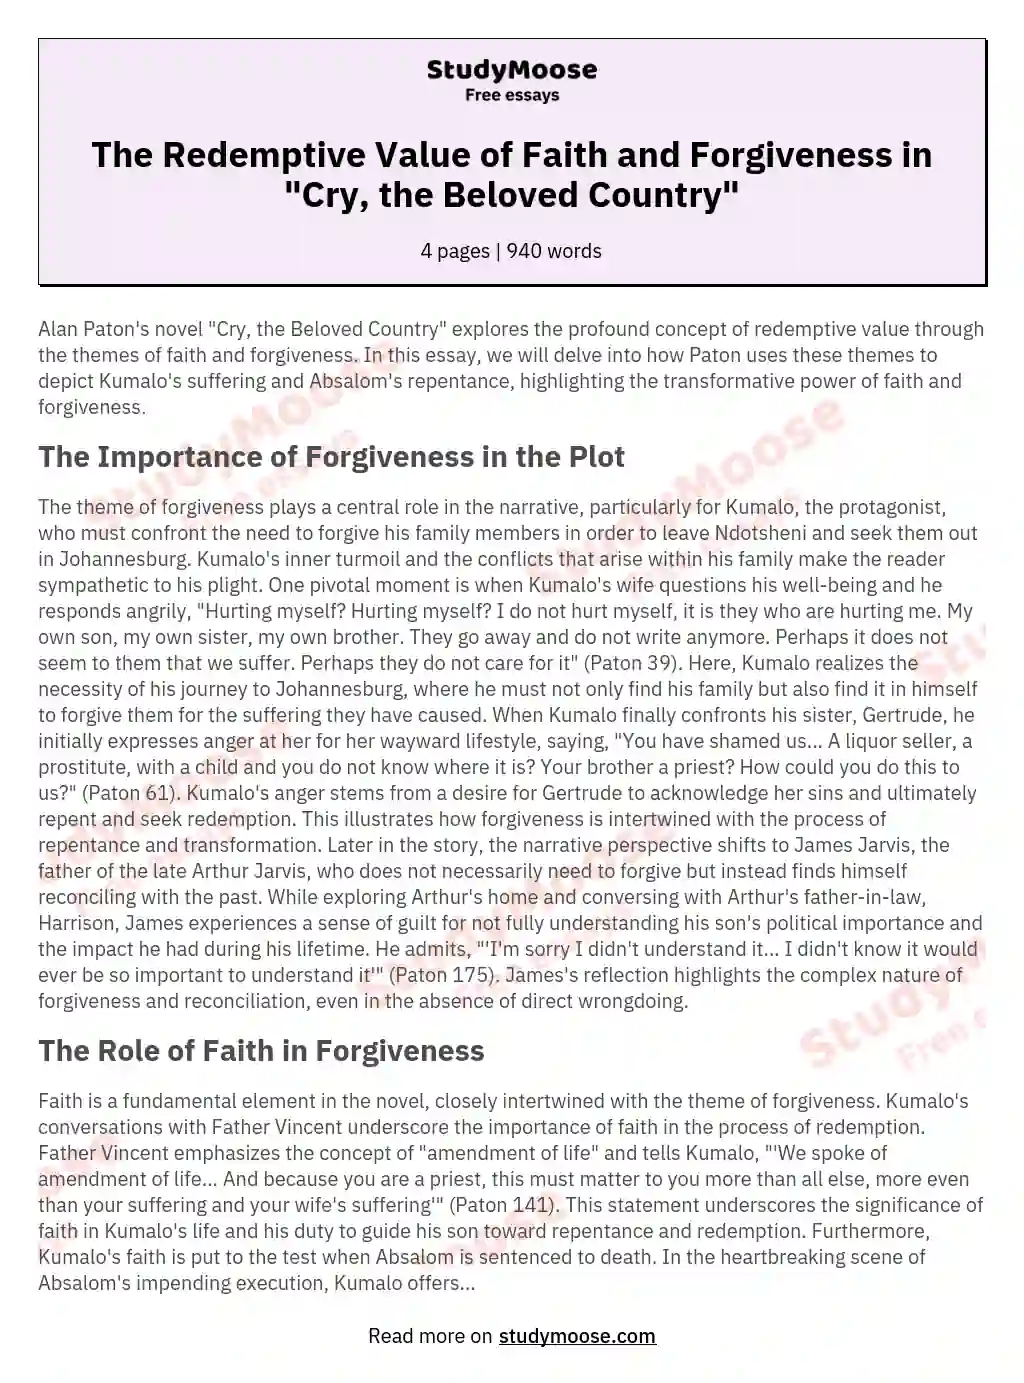 cry beloved country essay